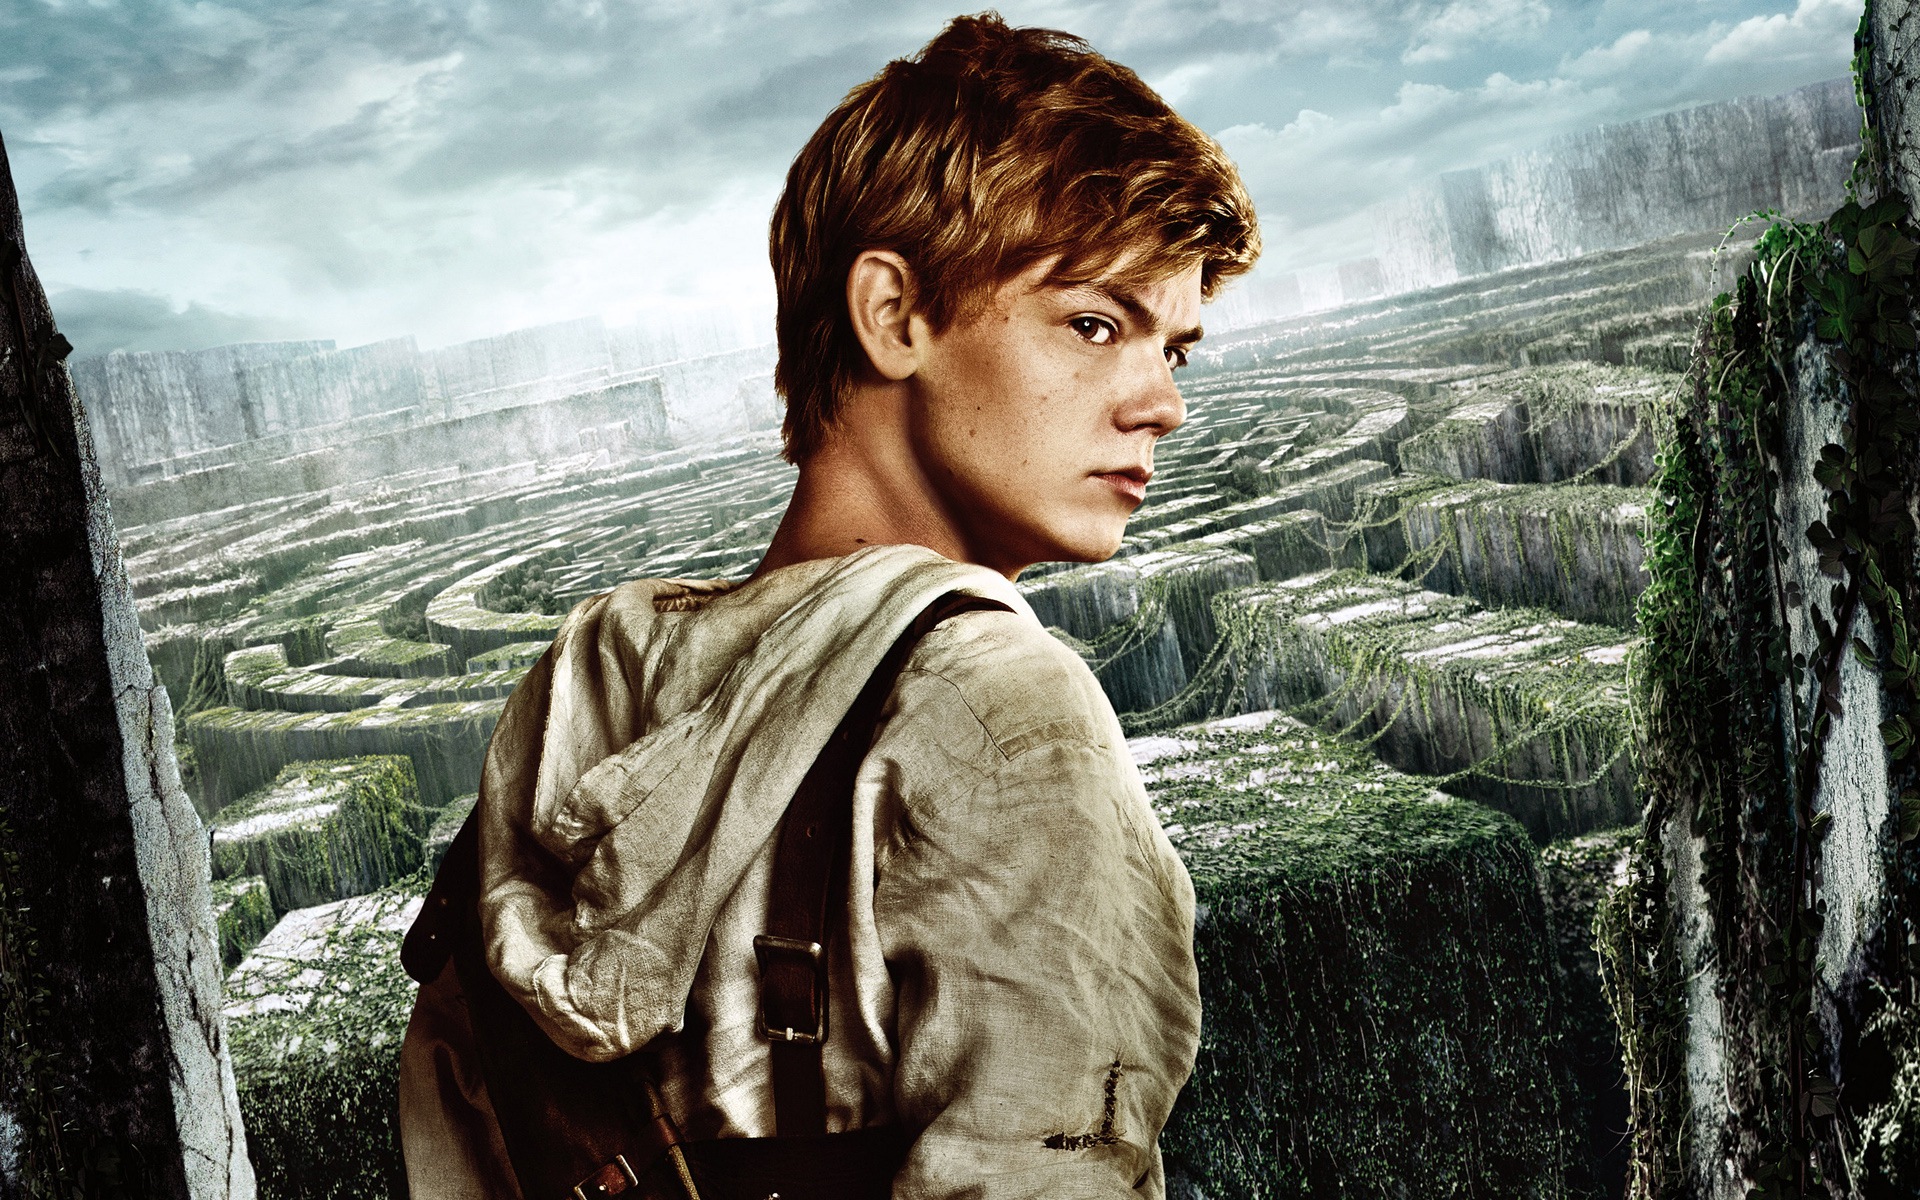 The Maze Runner HD movie wallpapers #8 - 1920x1200